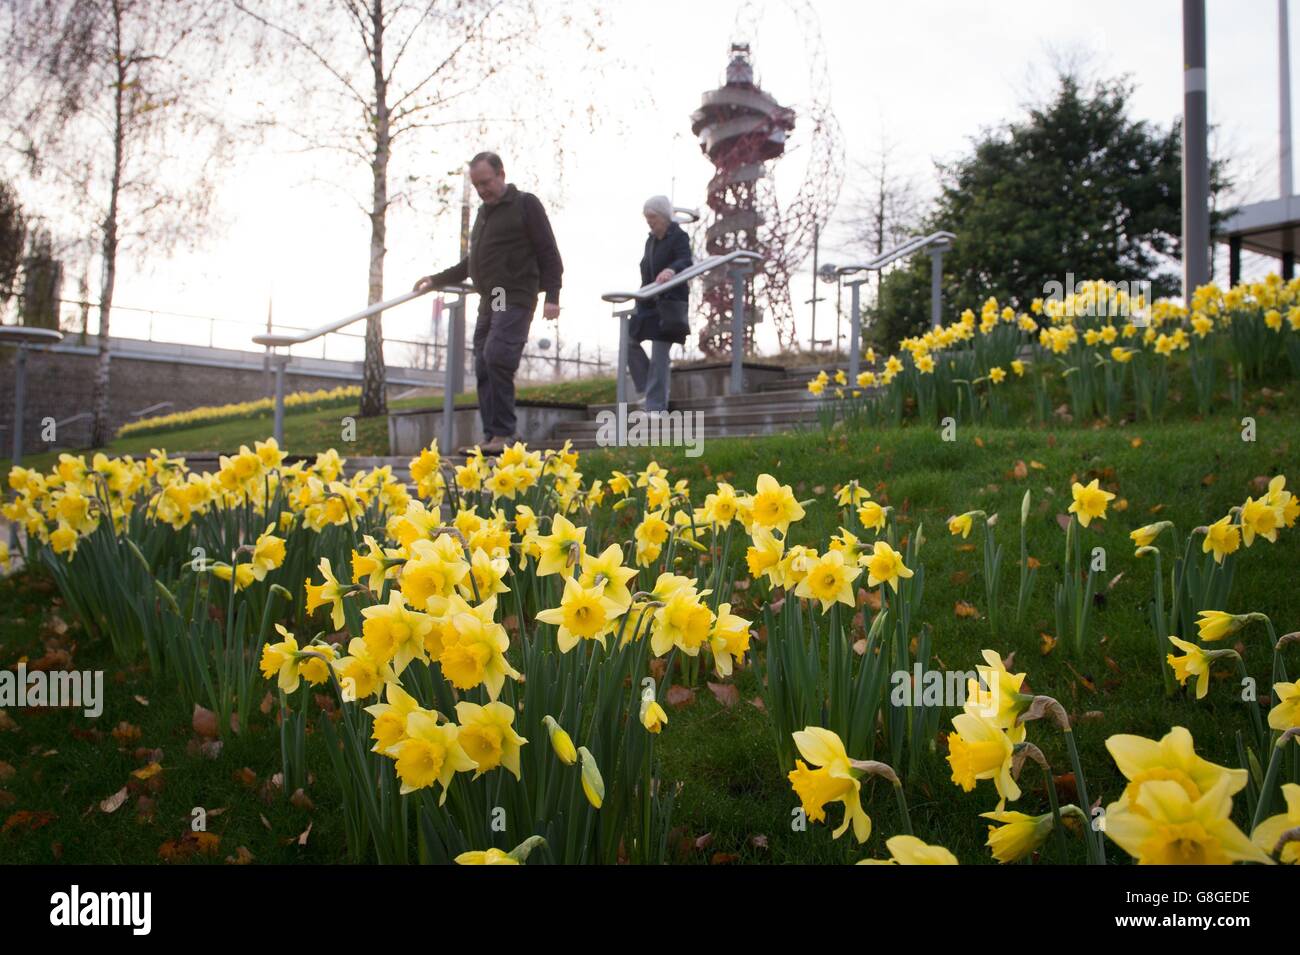 People walking past daffodils in bloom in front of the ArcelorMittal Orbit sculpture at the Queen Elizabeth Olympic Park in Stratford, east London as the UK could be set for the warmest December in almost 70 years as temperatures of 16C left Britons sweltering. Stock Photo